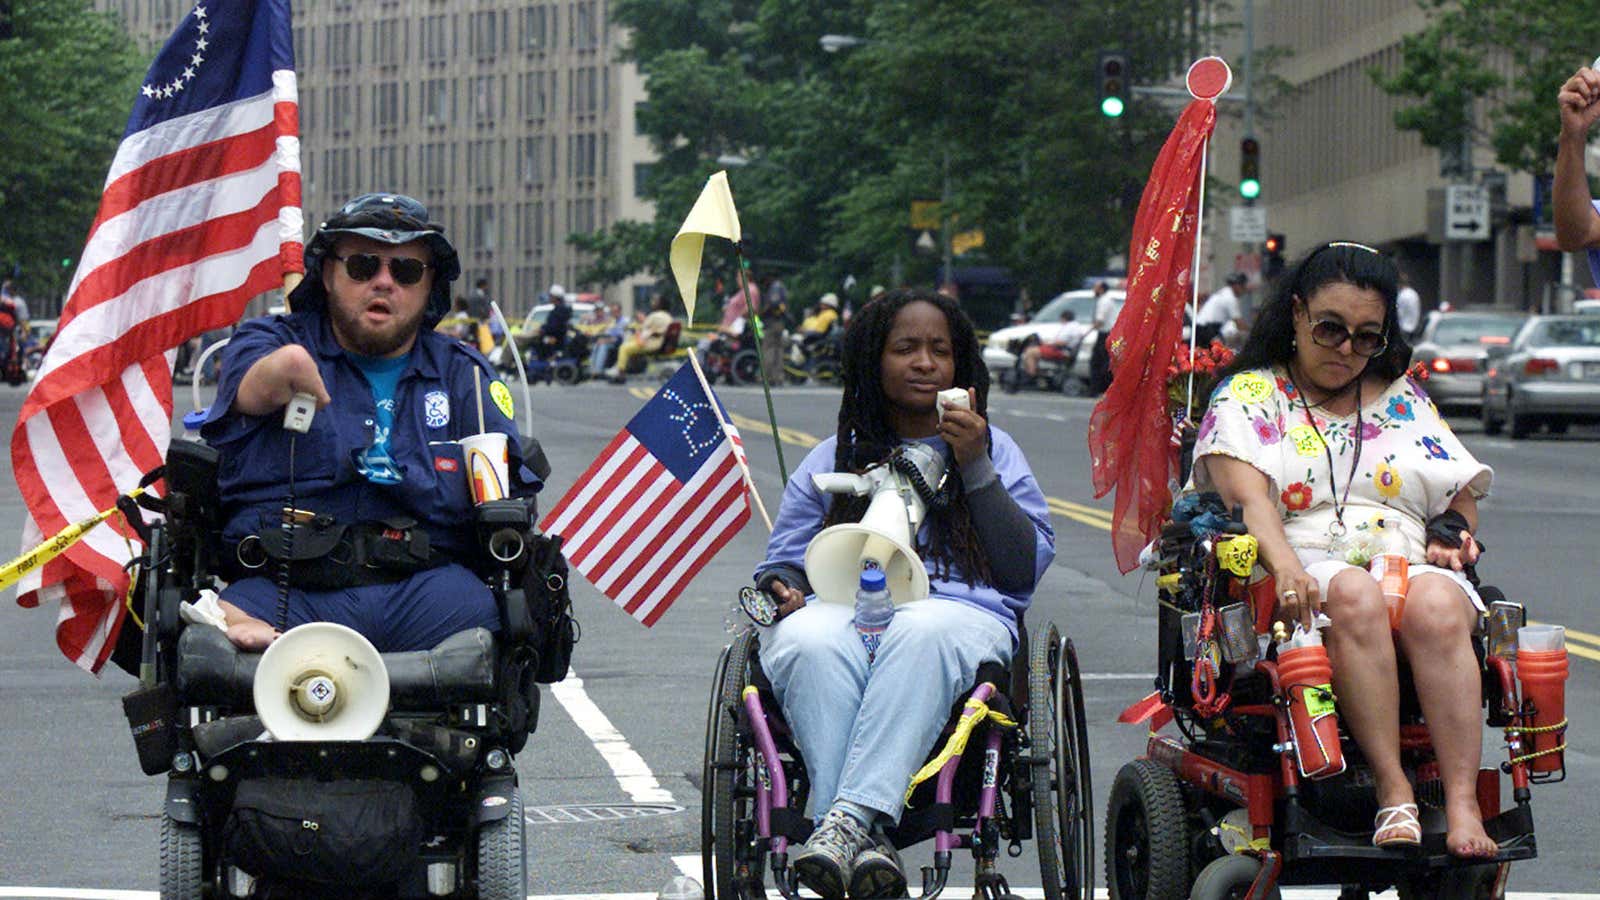 Anita Cameron (center) at an ADAPT protest in Washington, DC in 2002.